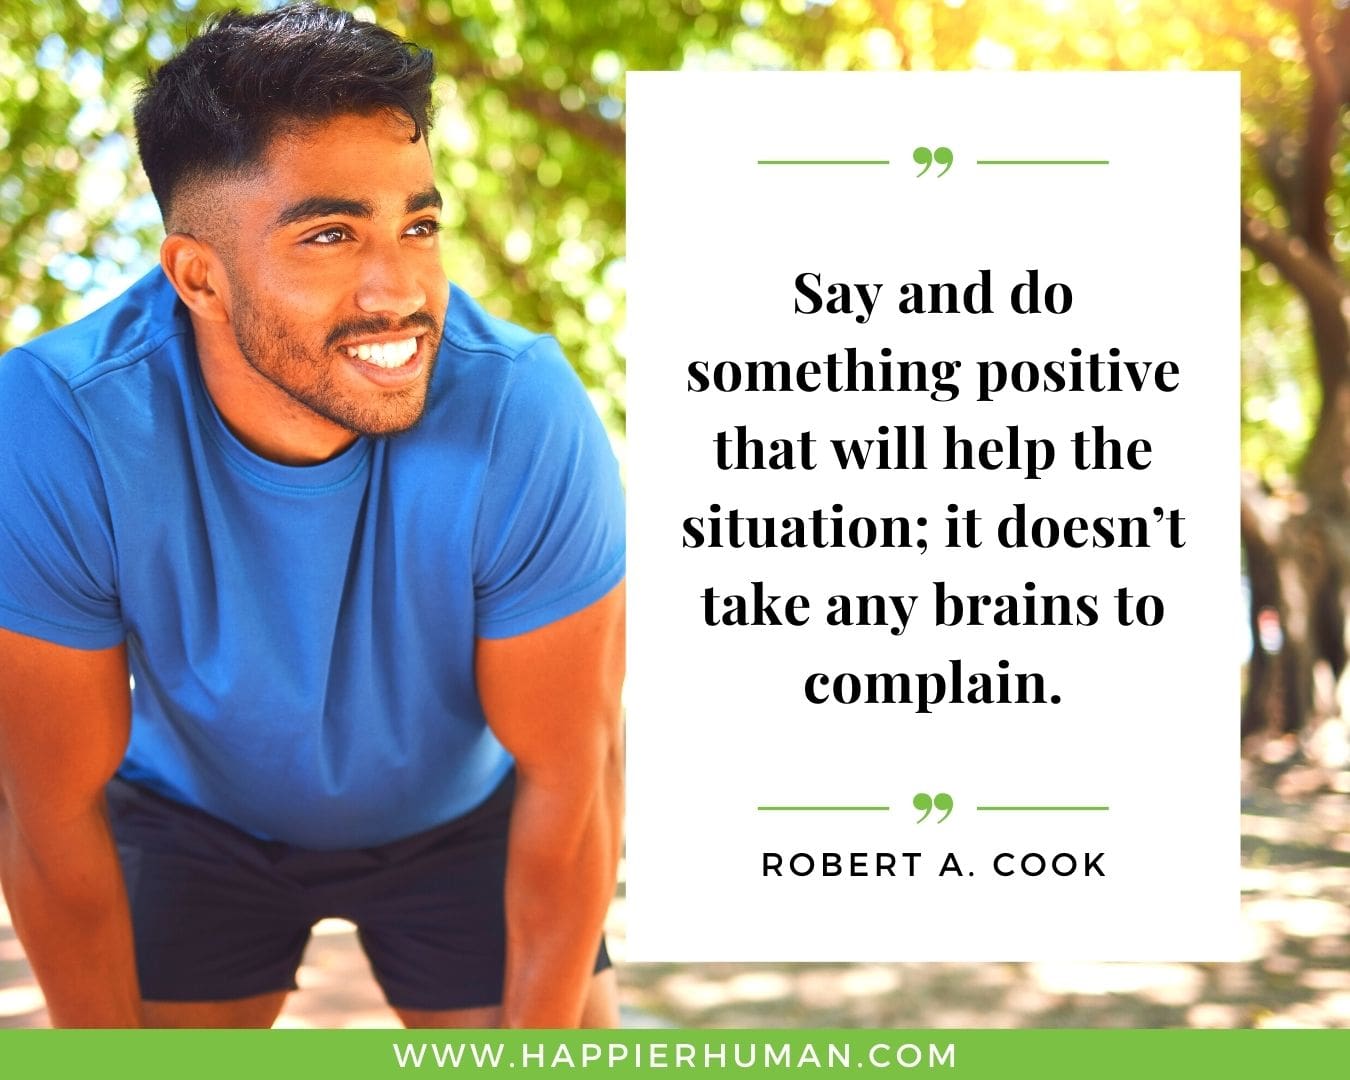 Positive Energy Quotes - “Say and do something positive that will help the situation; it doesn’t take any brains to complain.”- Robert A. Cook